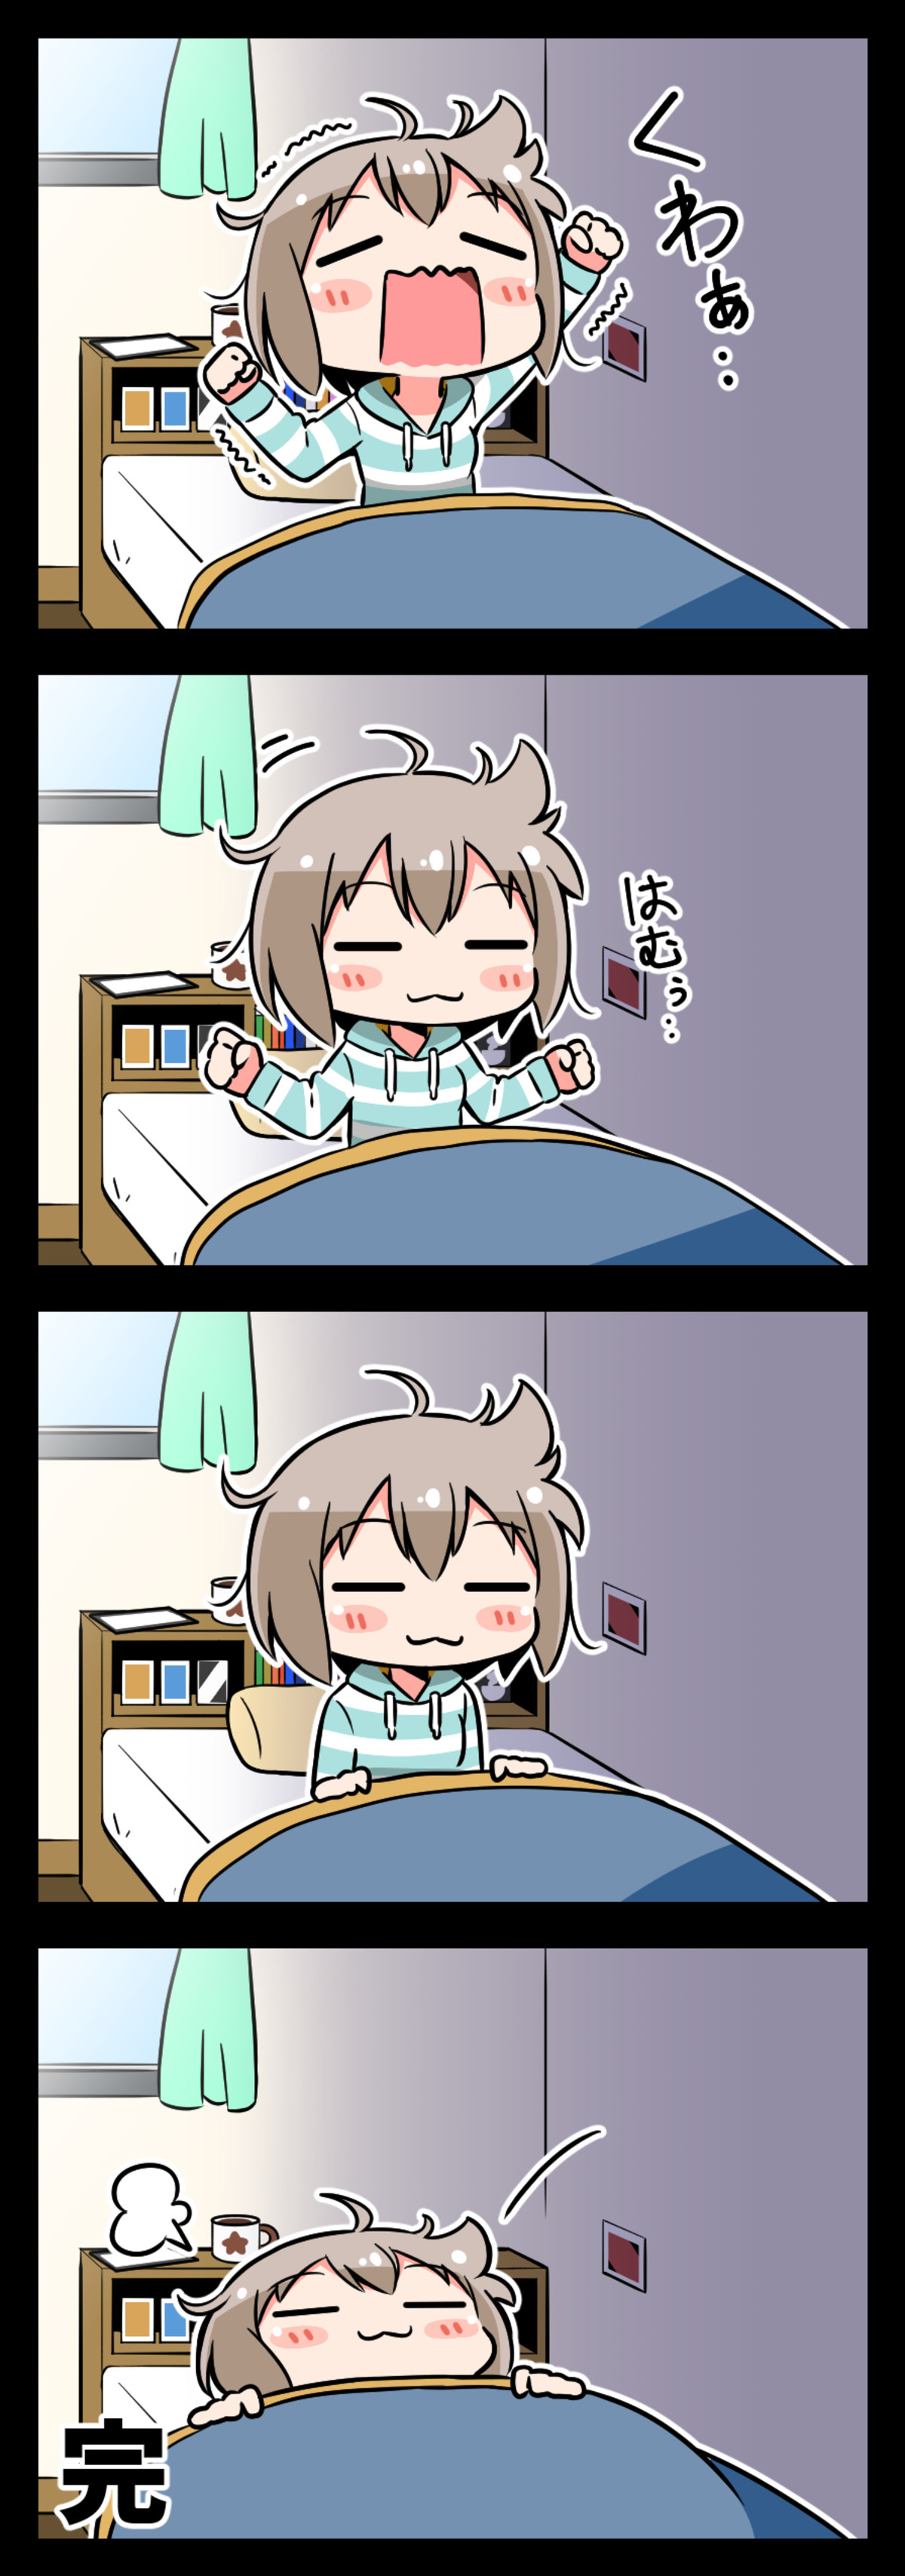 Daily BanG Dream #452. Artist's Twitter post: Girl is from BanG Dream join list: BanGDream (108 subs)Mention History &quot;モカちゃんの朝【バンドリ漫画]&quot; &quot;Moca's mo